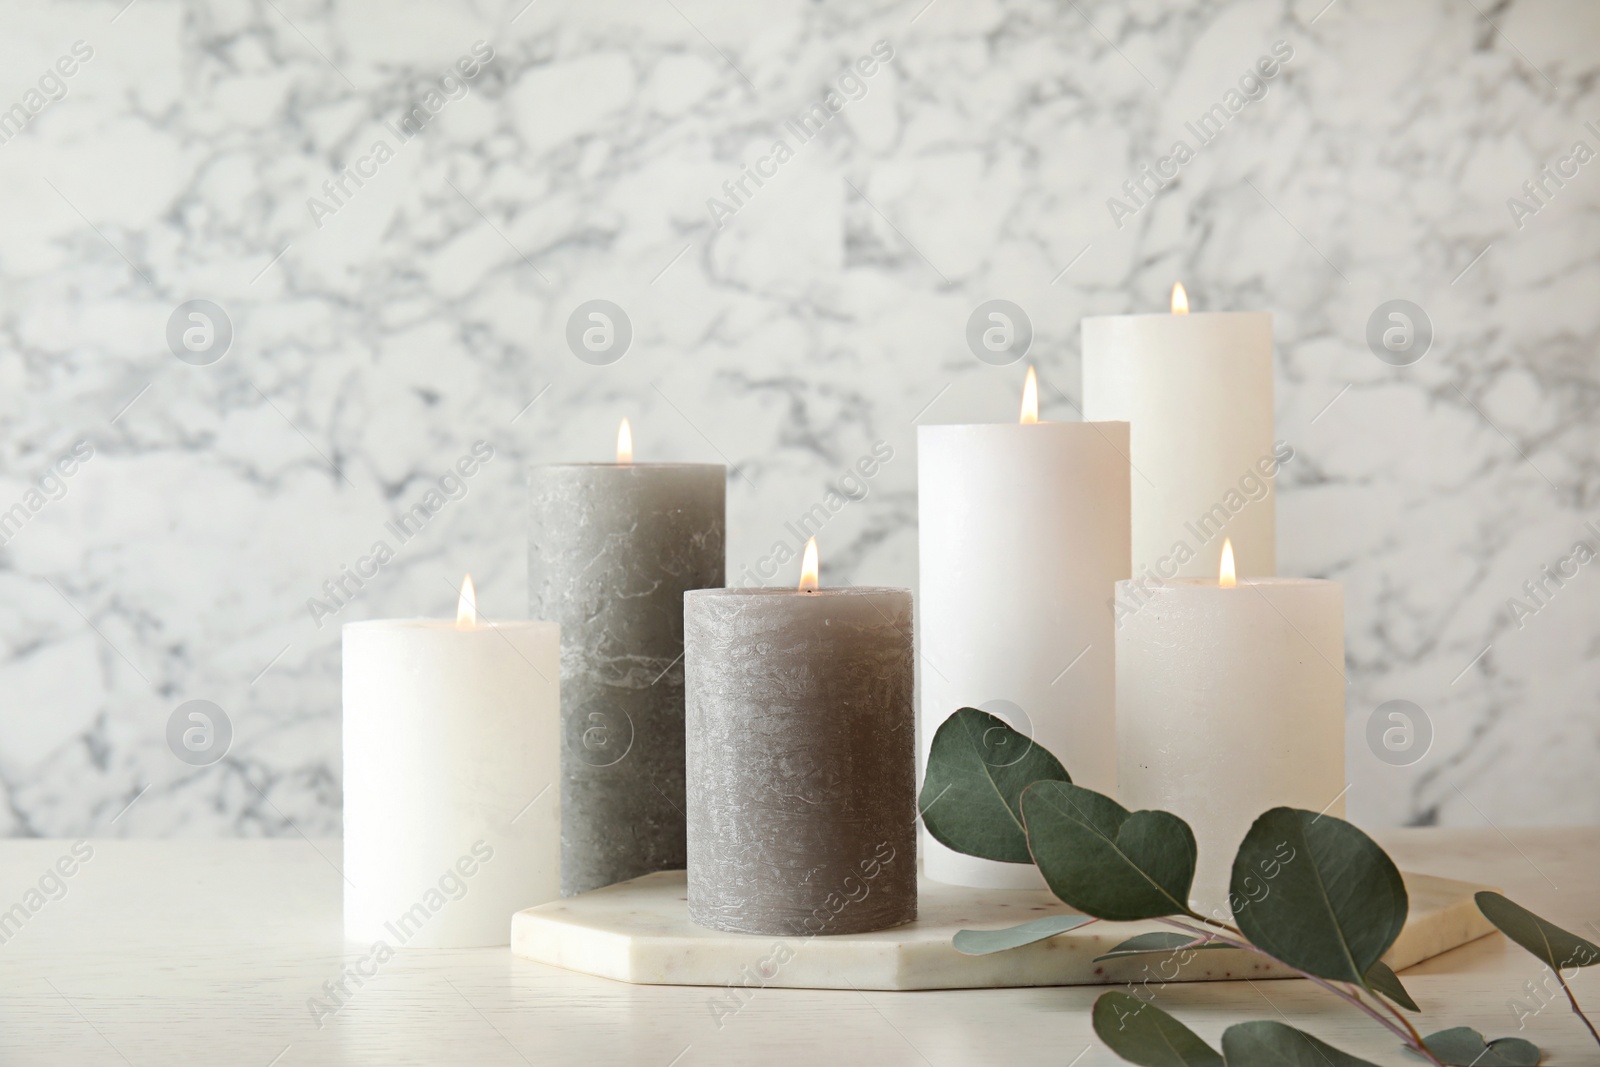 Photo of Composition with burning candles on table against marble background